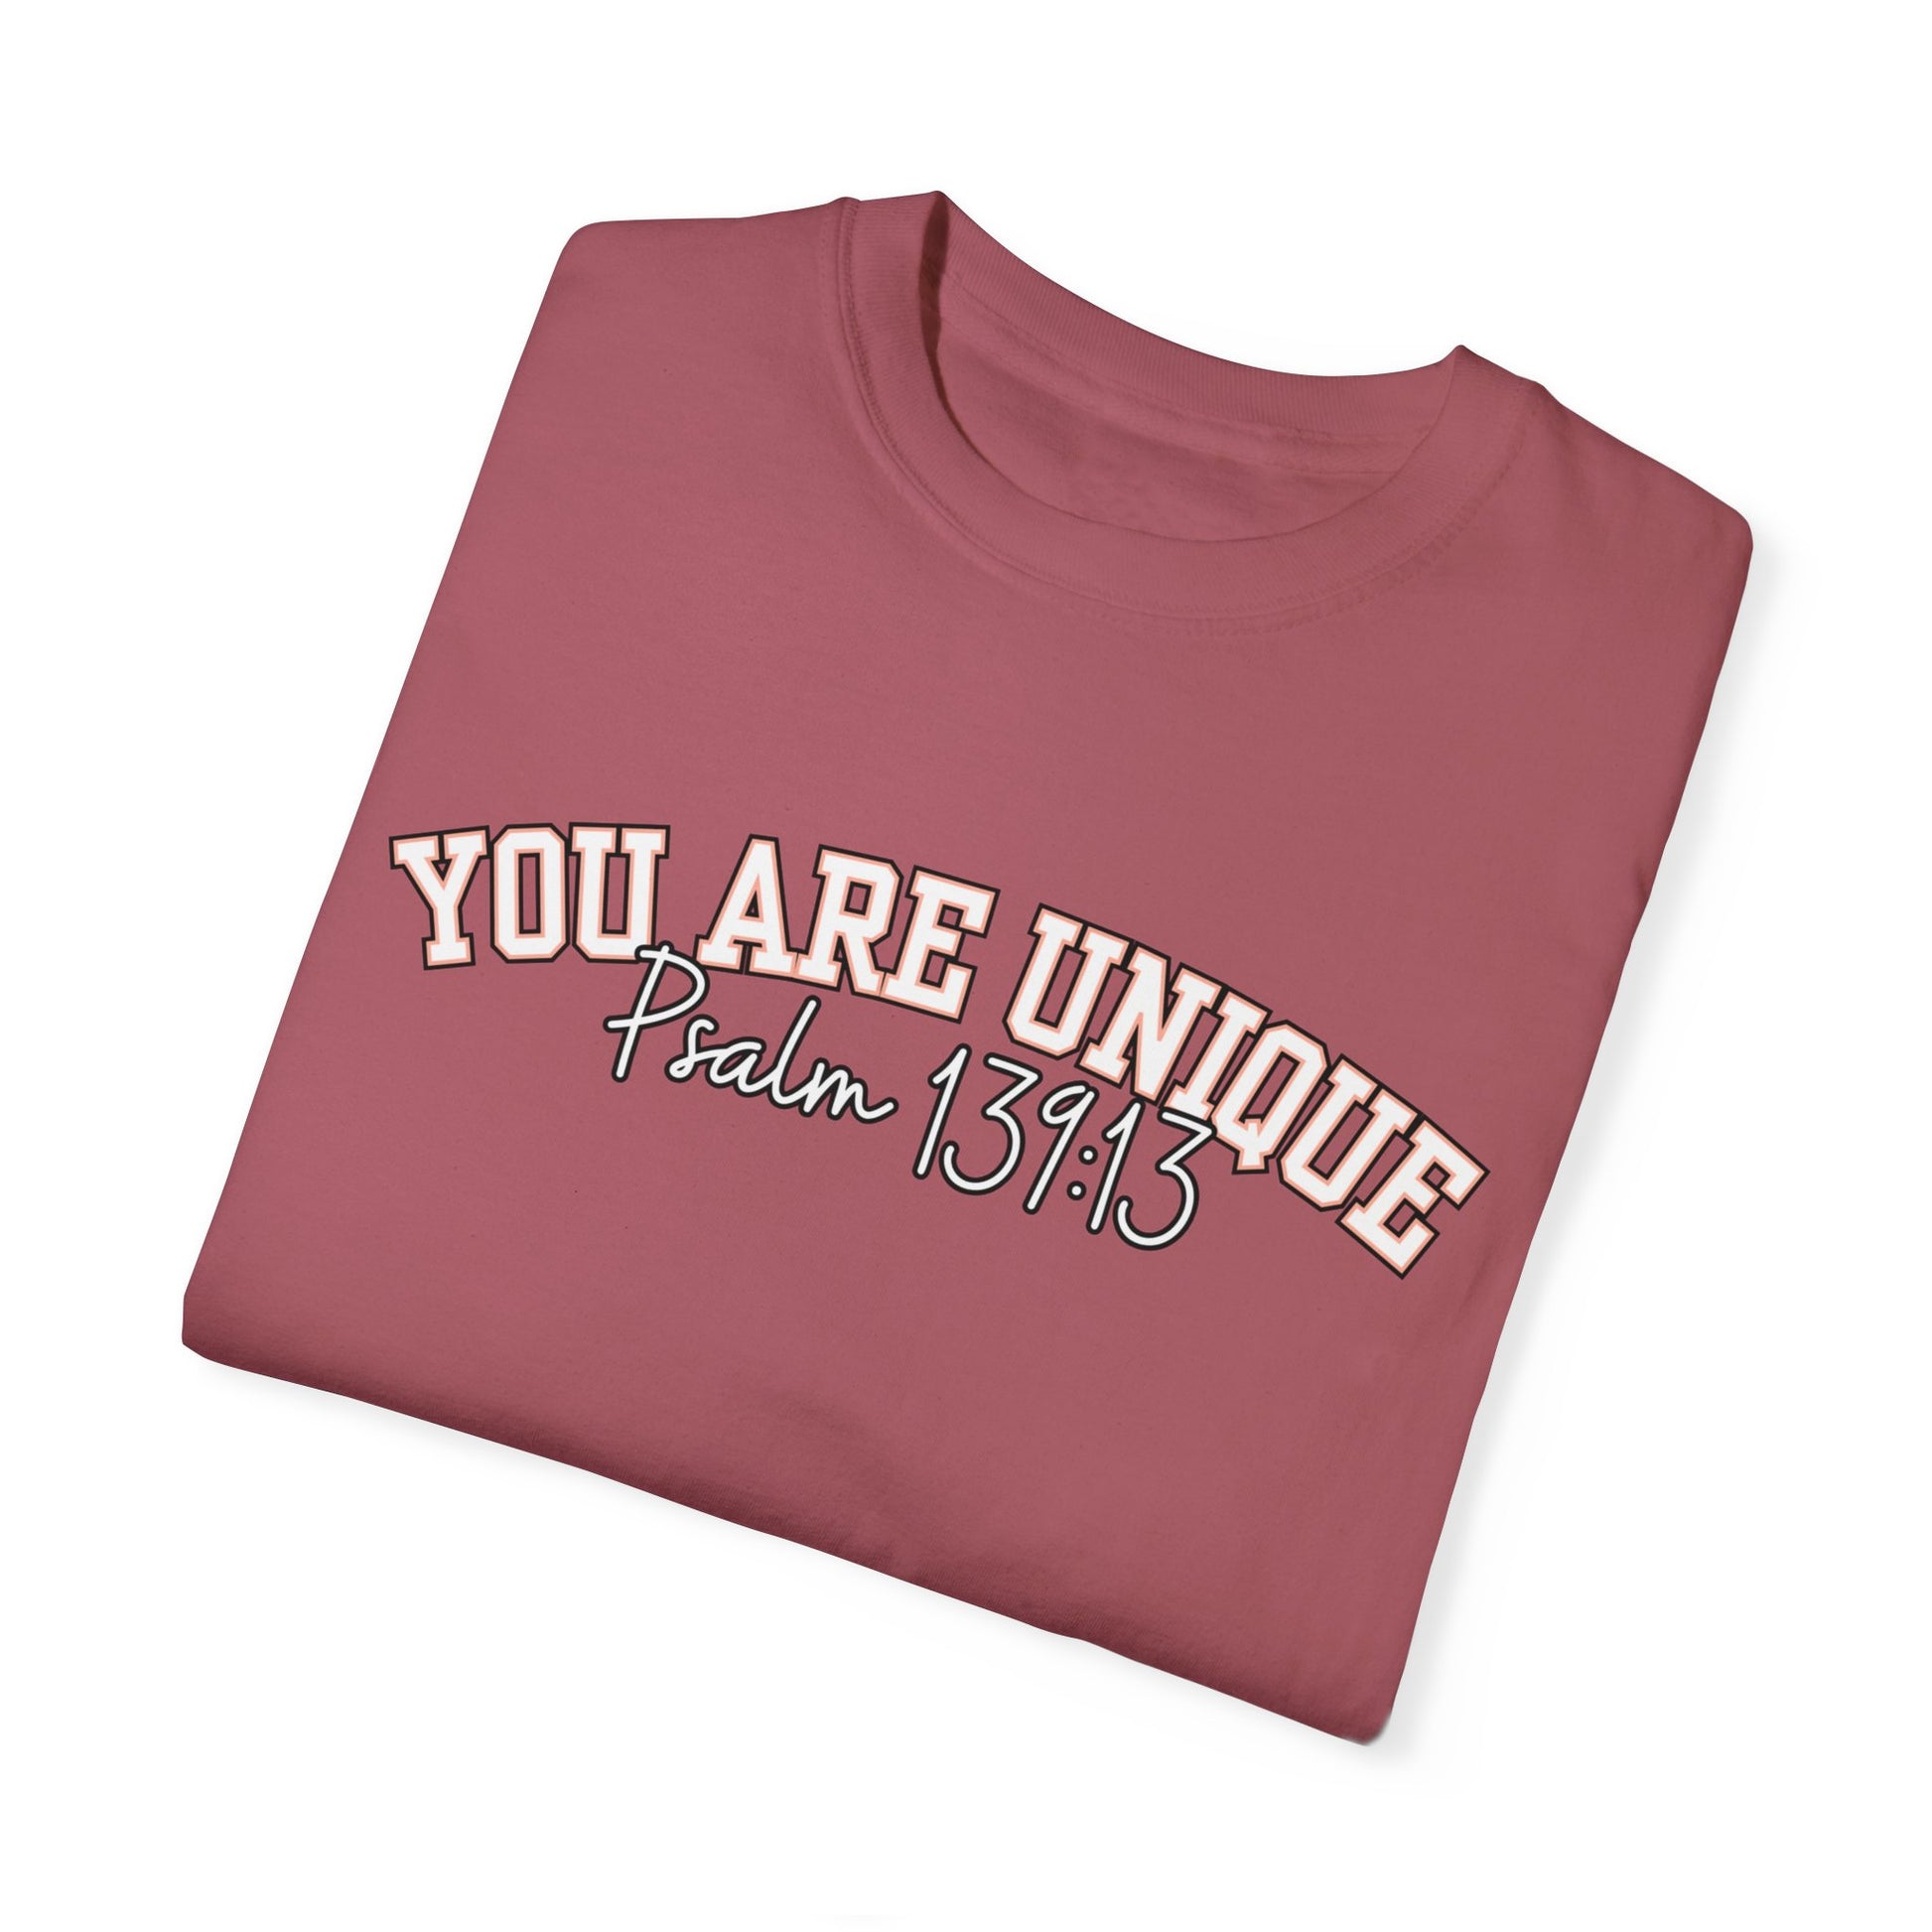 Women's Comfort Colors Tee: 'You Are Unique - Psalm 139:13' Inspirational Christian Shirt for Stylish Comfort! - Eddy and Rita